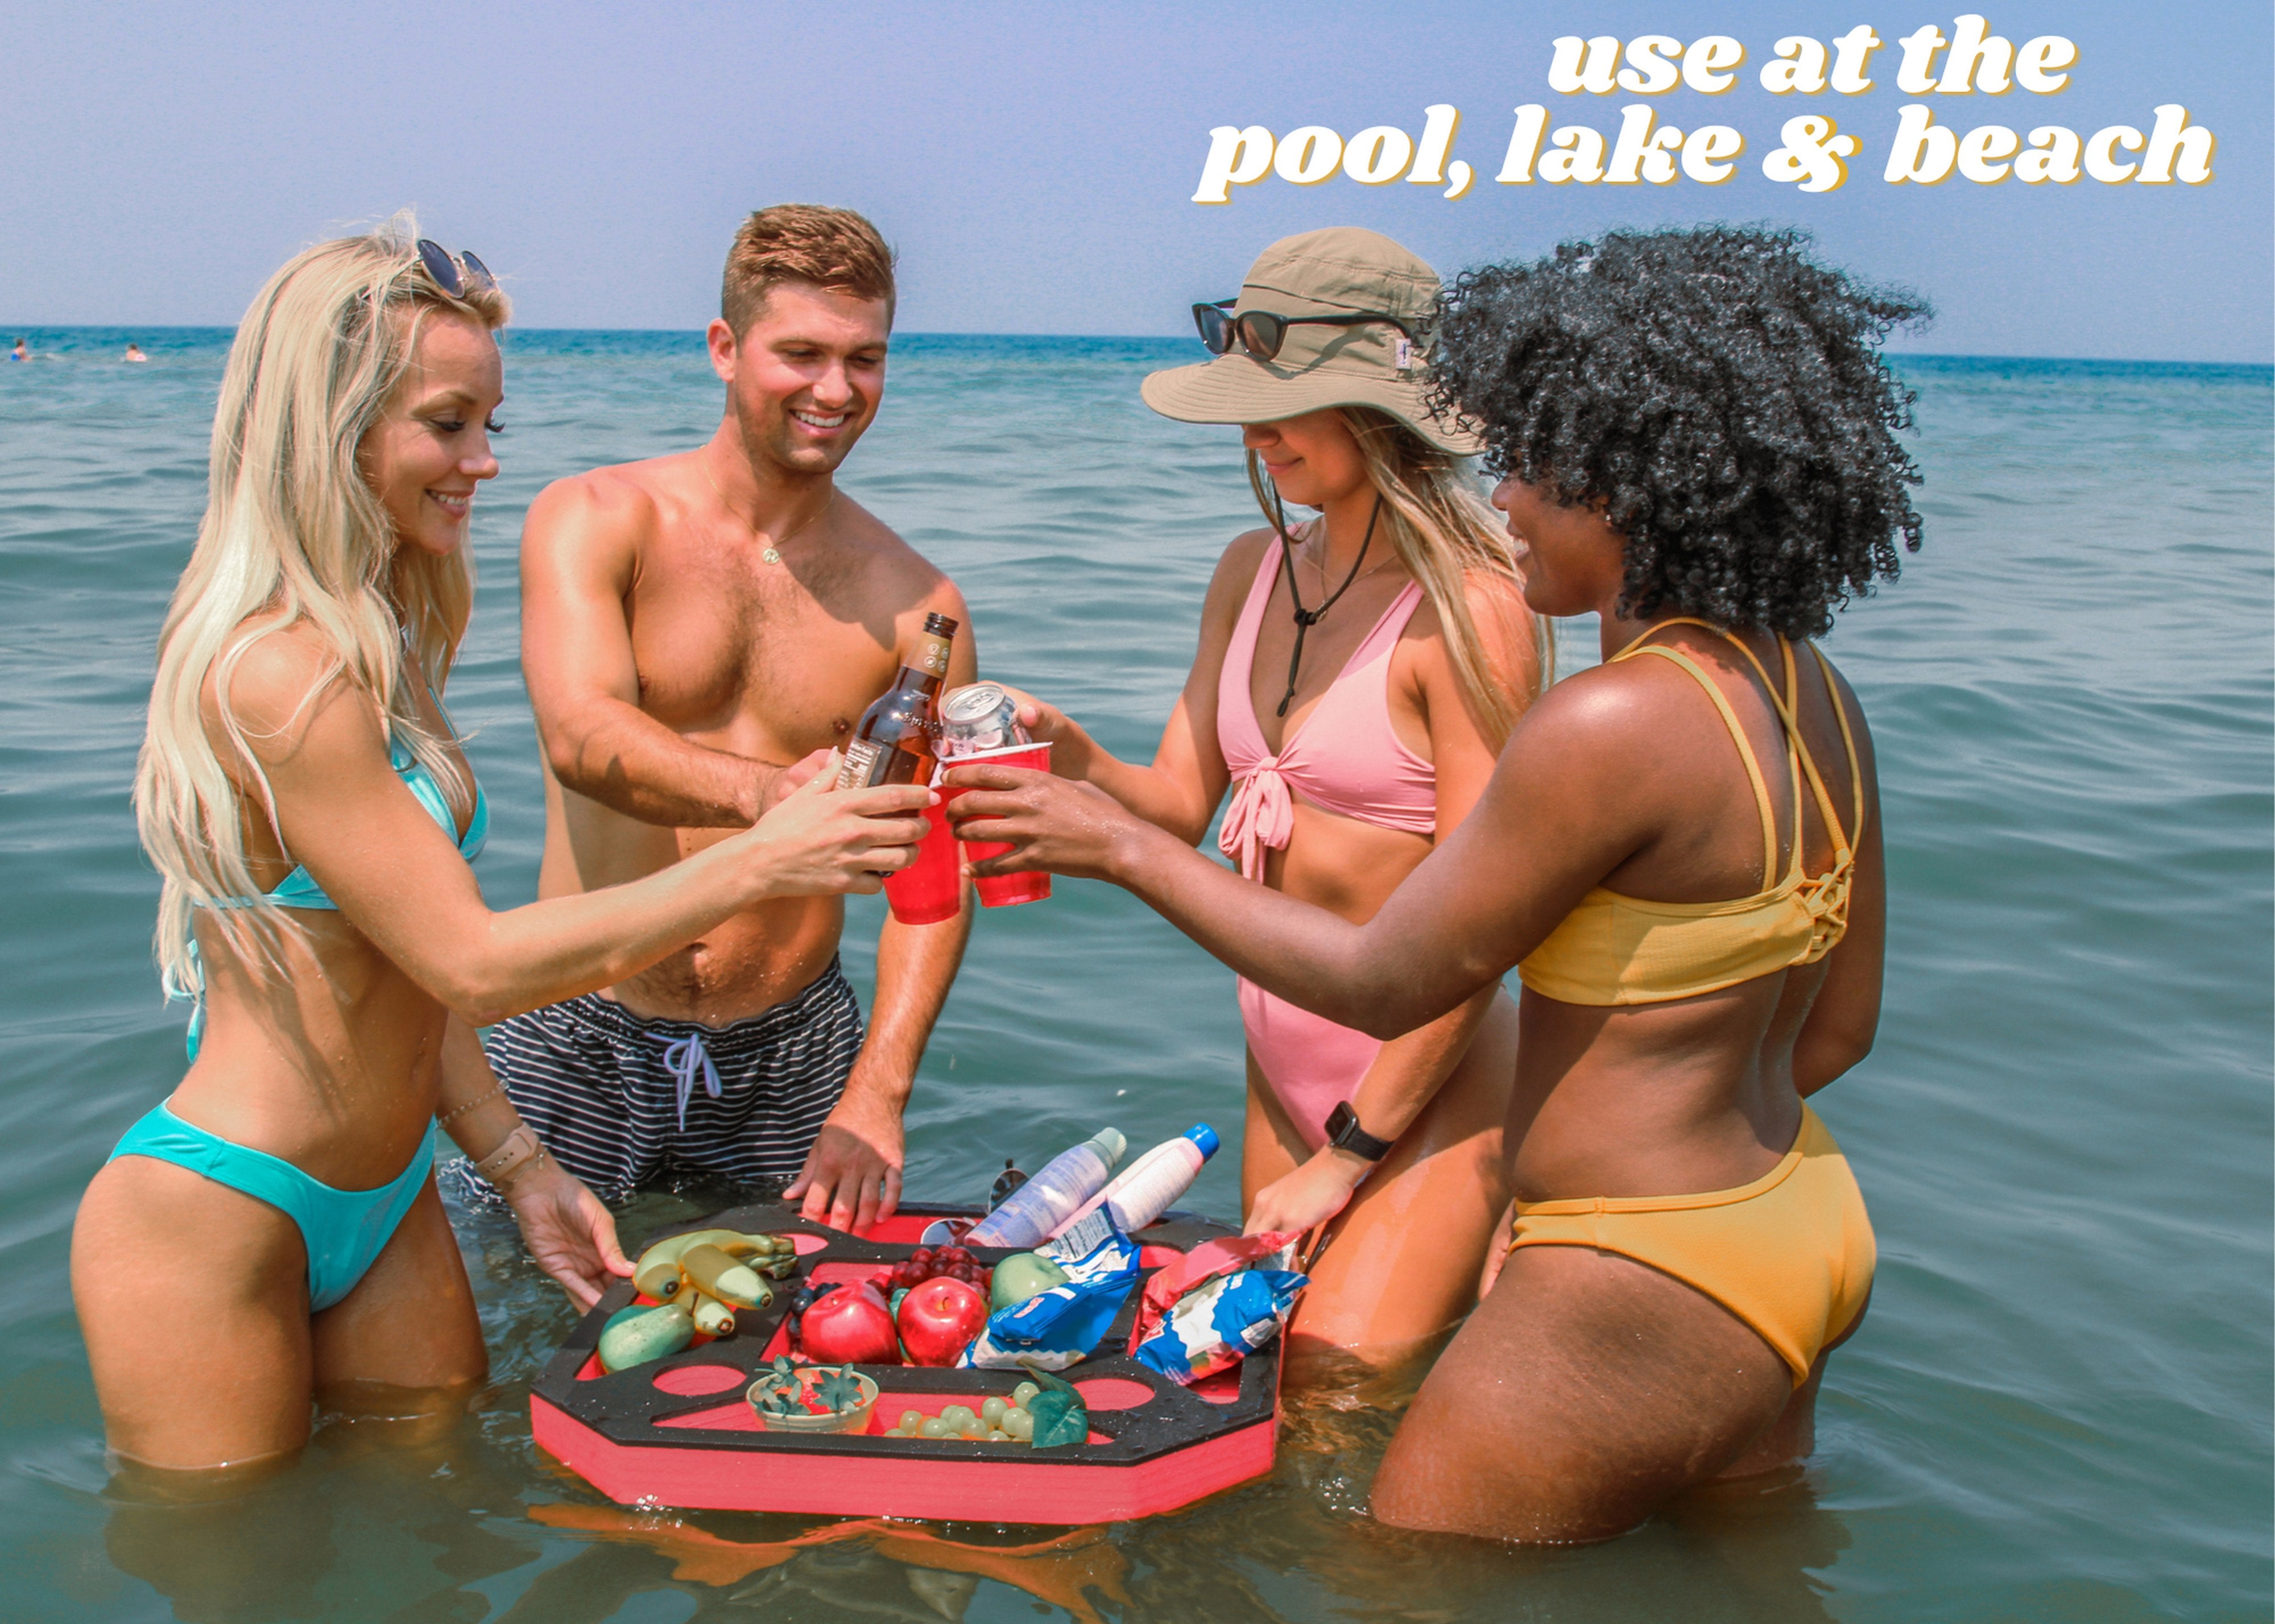 Large Floating Spa Hot Tub Bar Drink and Food Table Red and Black Tray for Pool or Beach Party Float Lounge Durable Foam 23.5 Inches 9 Compartment